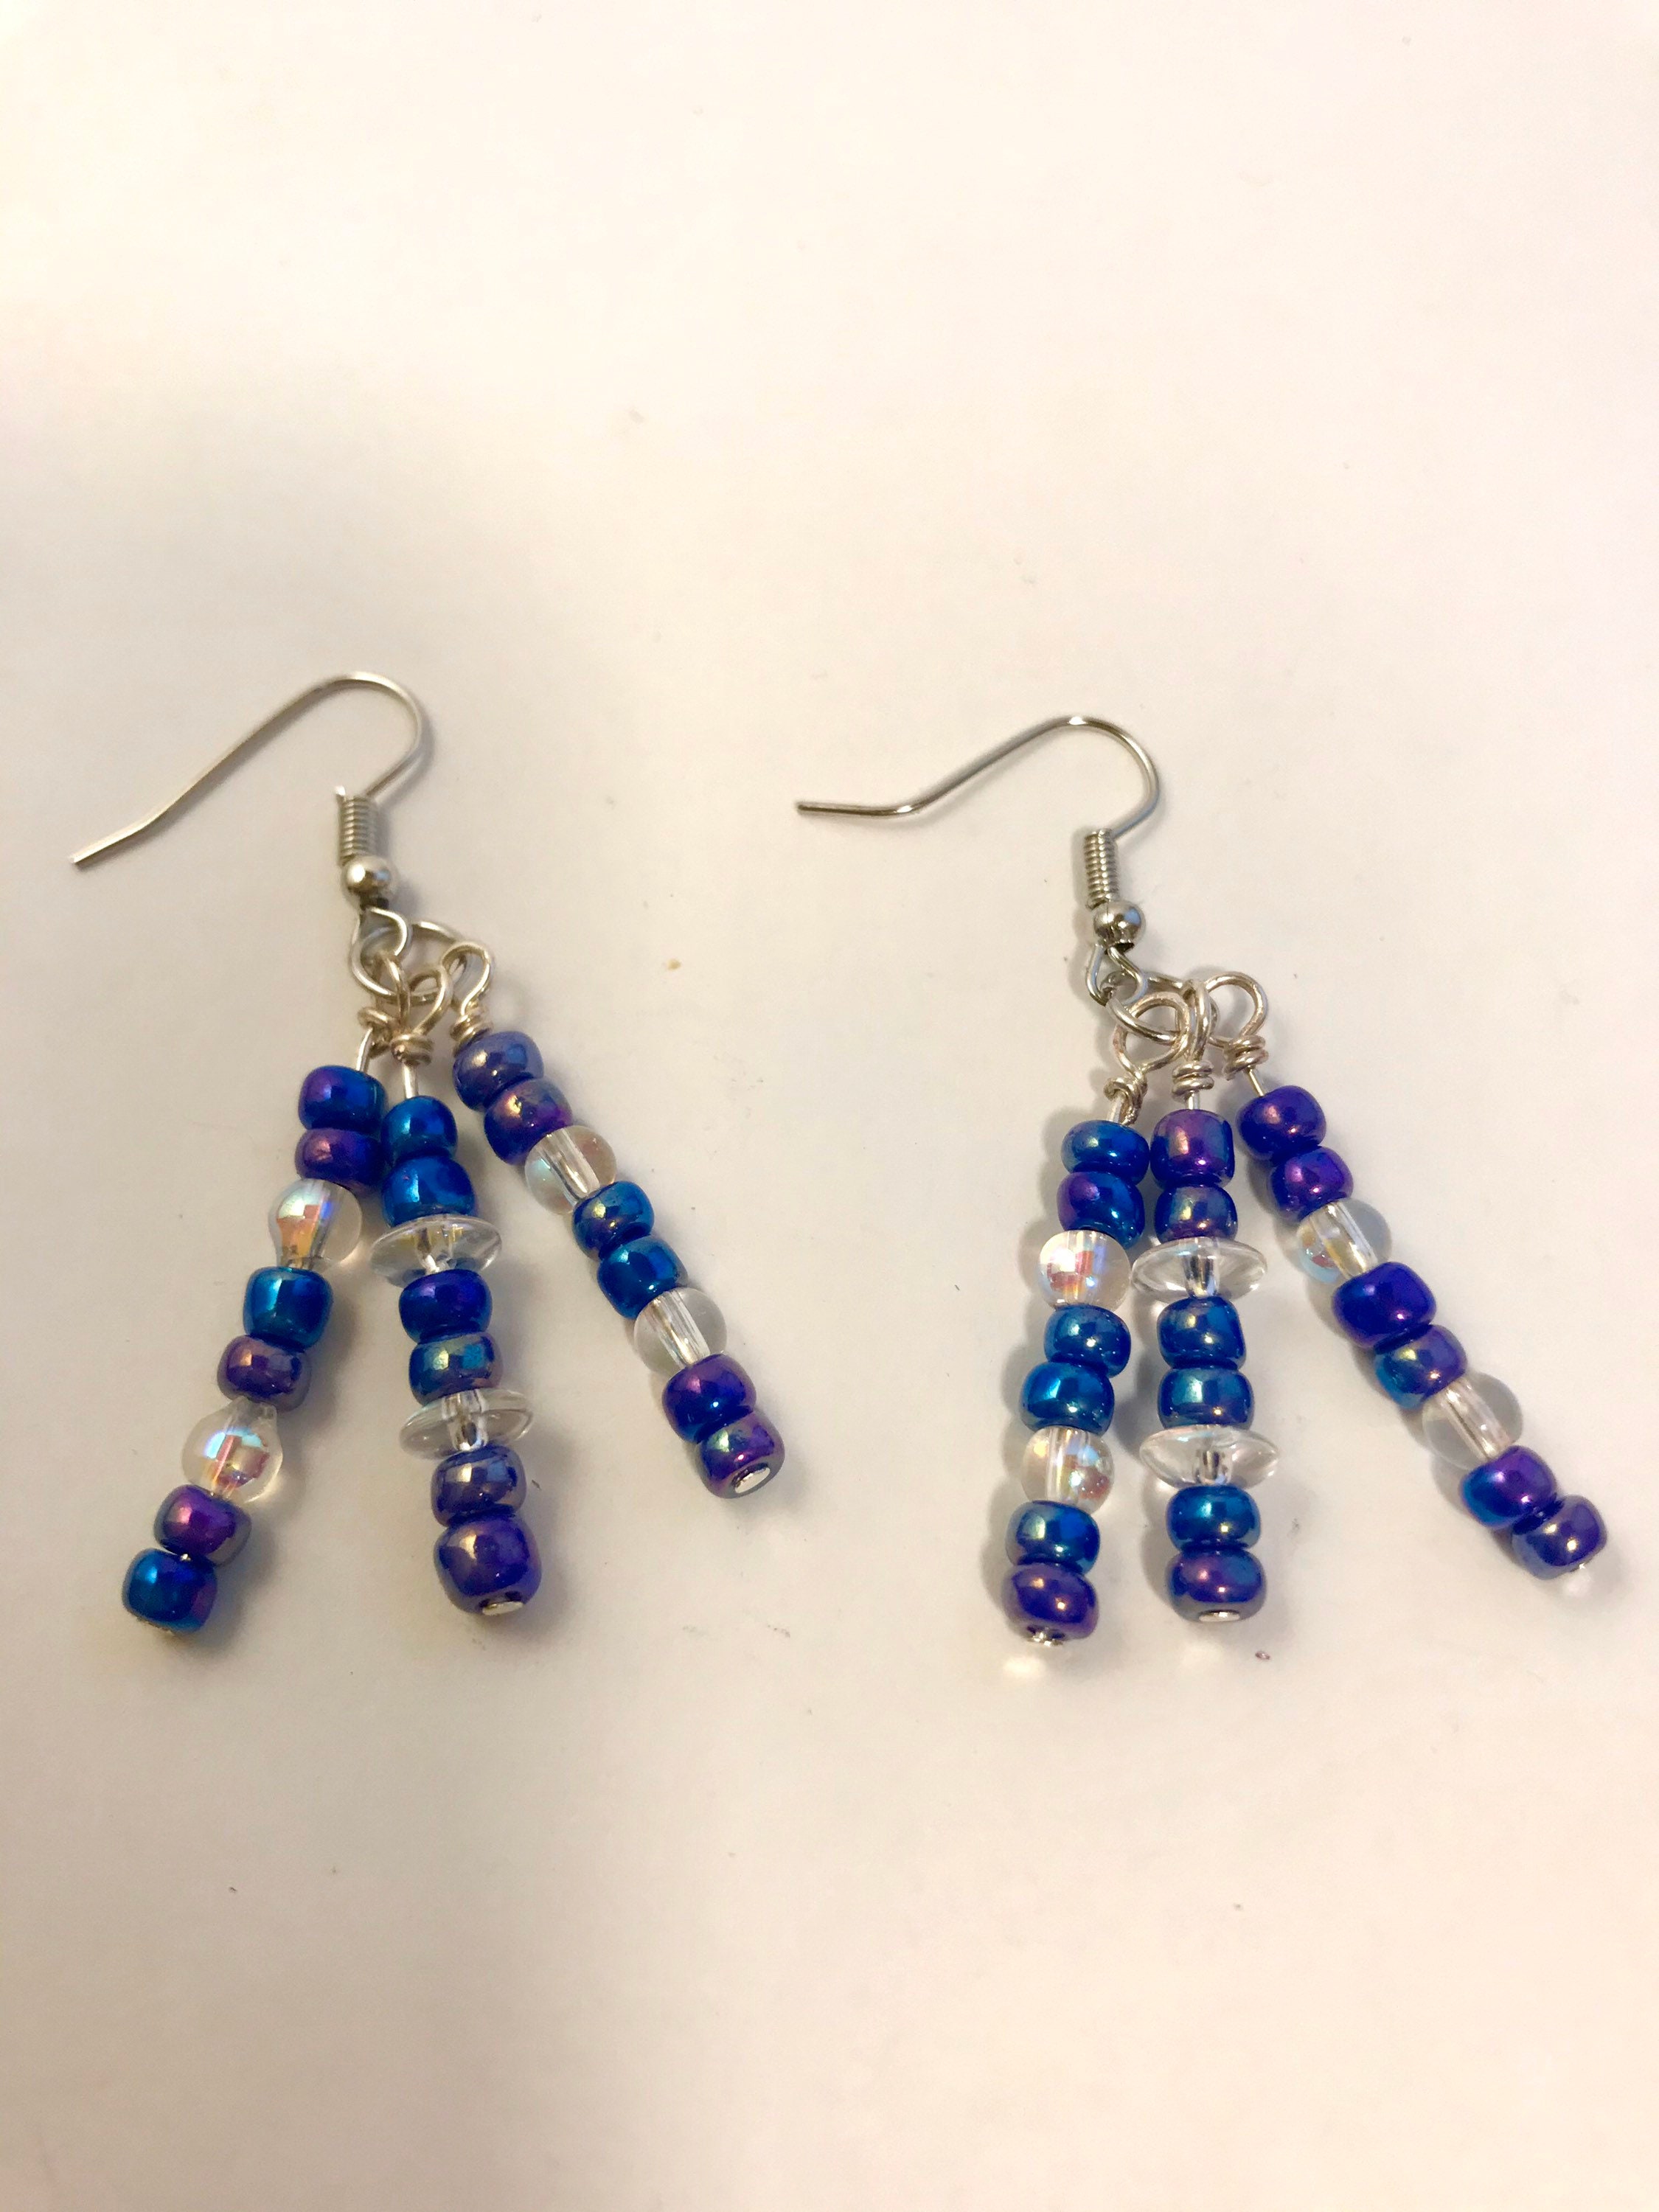 Iridescent Blue Clear Dangle Earrings. American made in the USA - Etsy.de